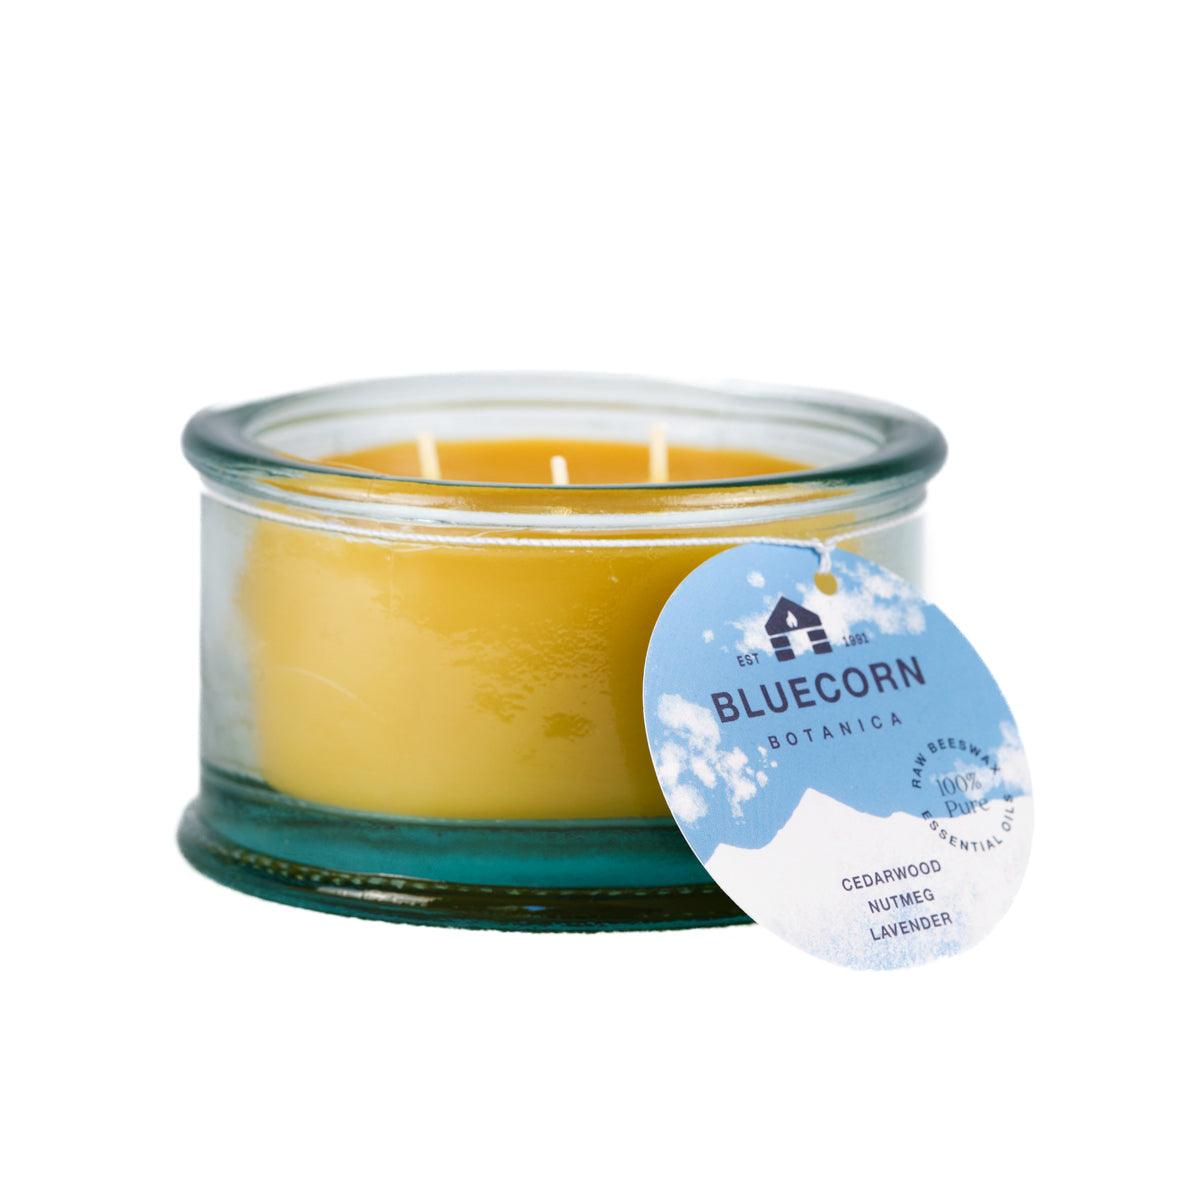 Botanica Beeswax Scented Candle - 3-Wick